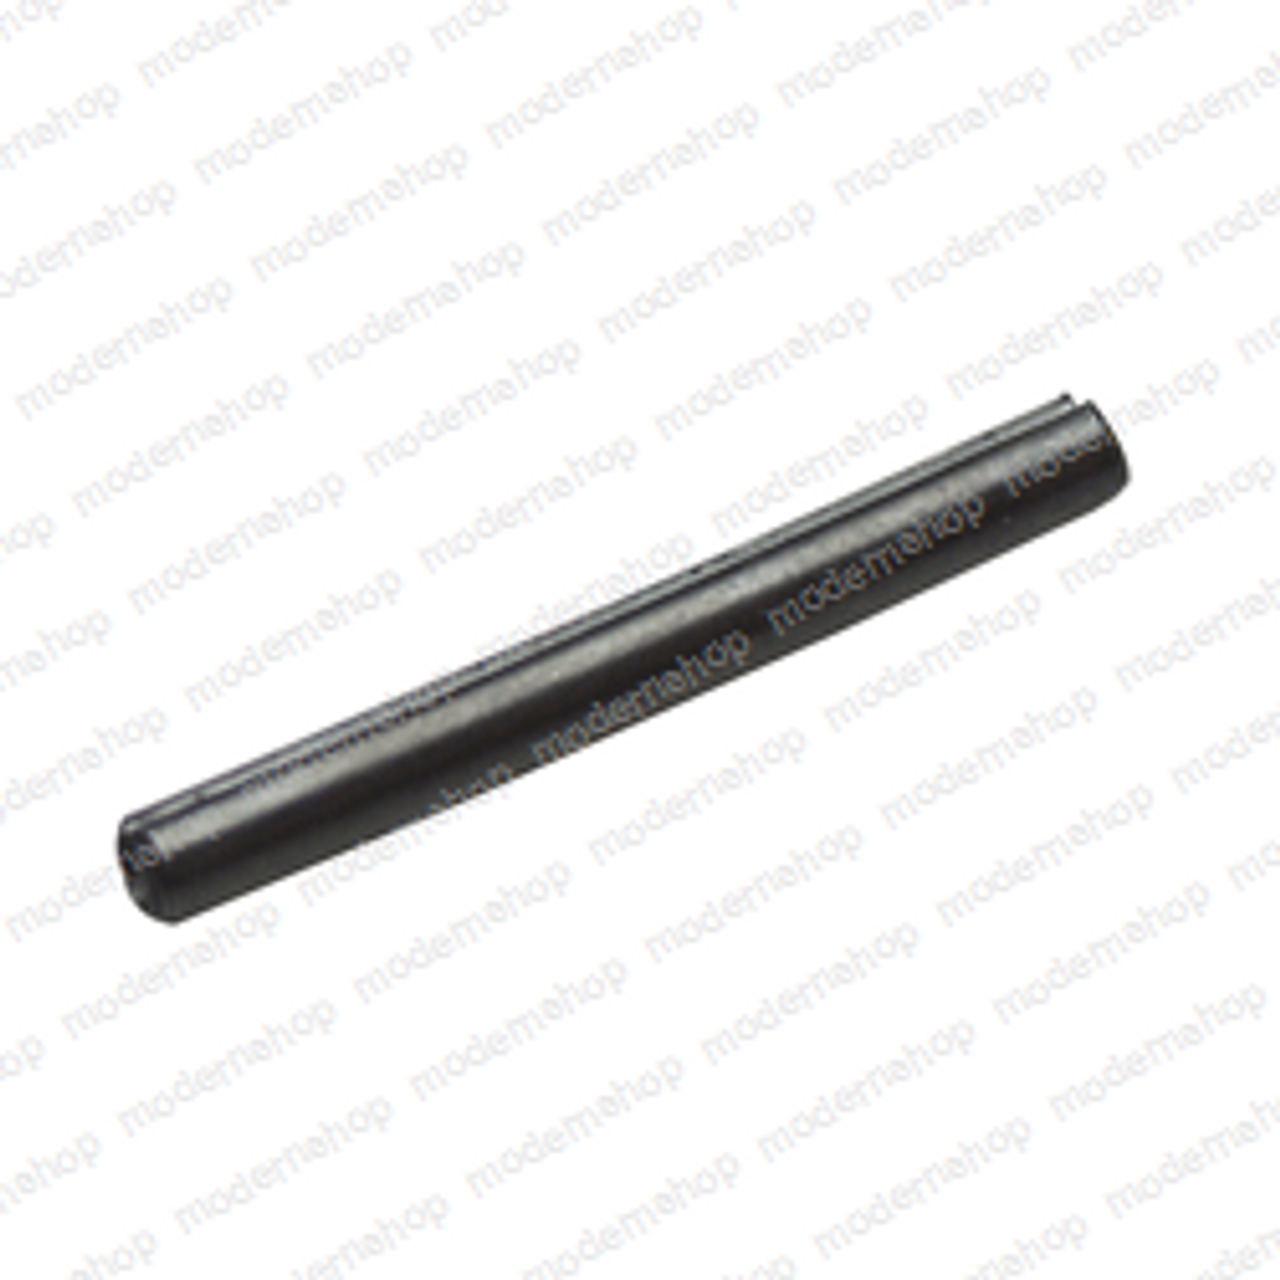 060000-003: Crown Forklift PIN - ROLL 1/8 X 1-1/4 IN